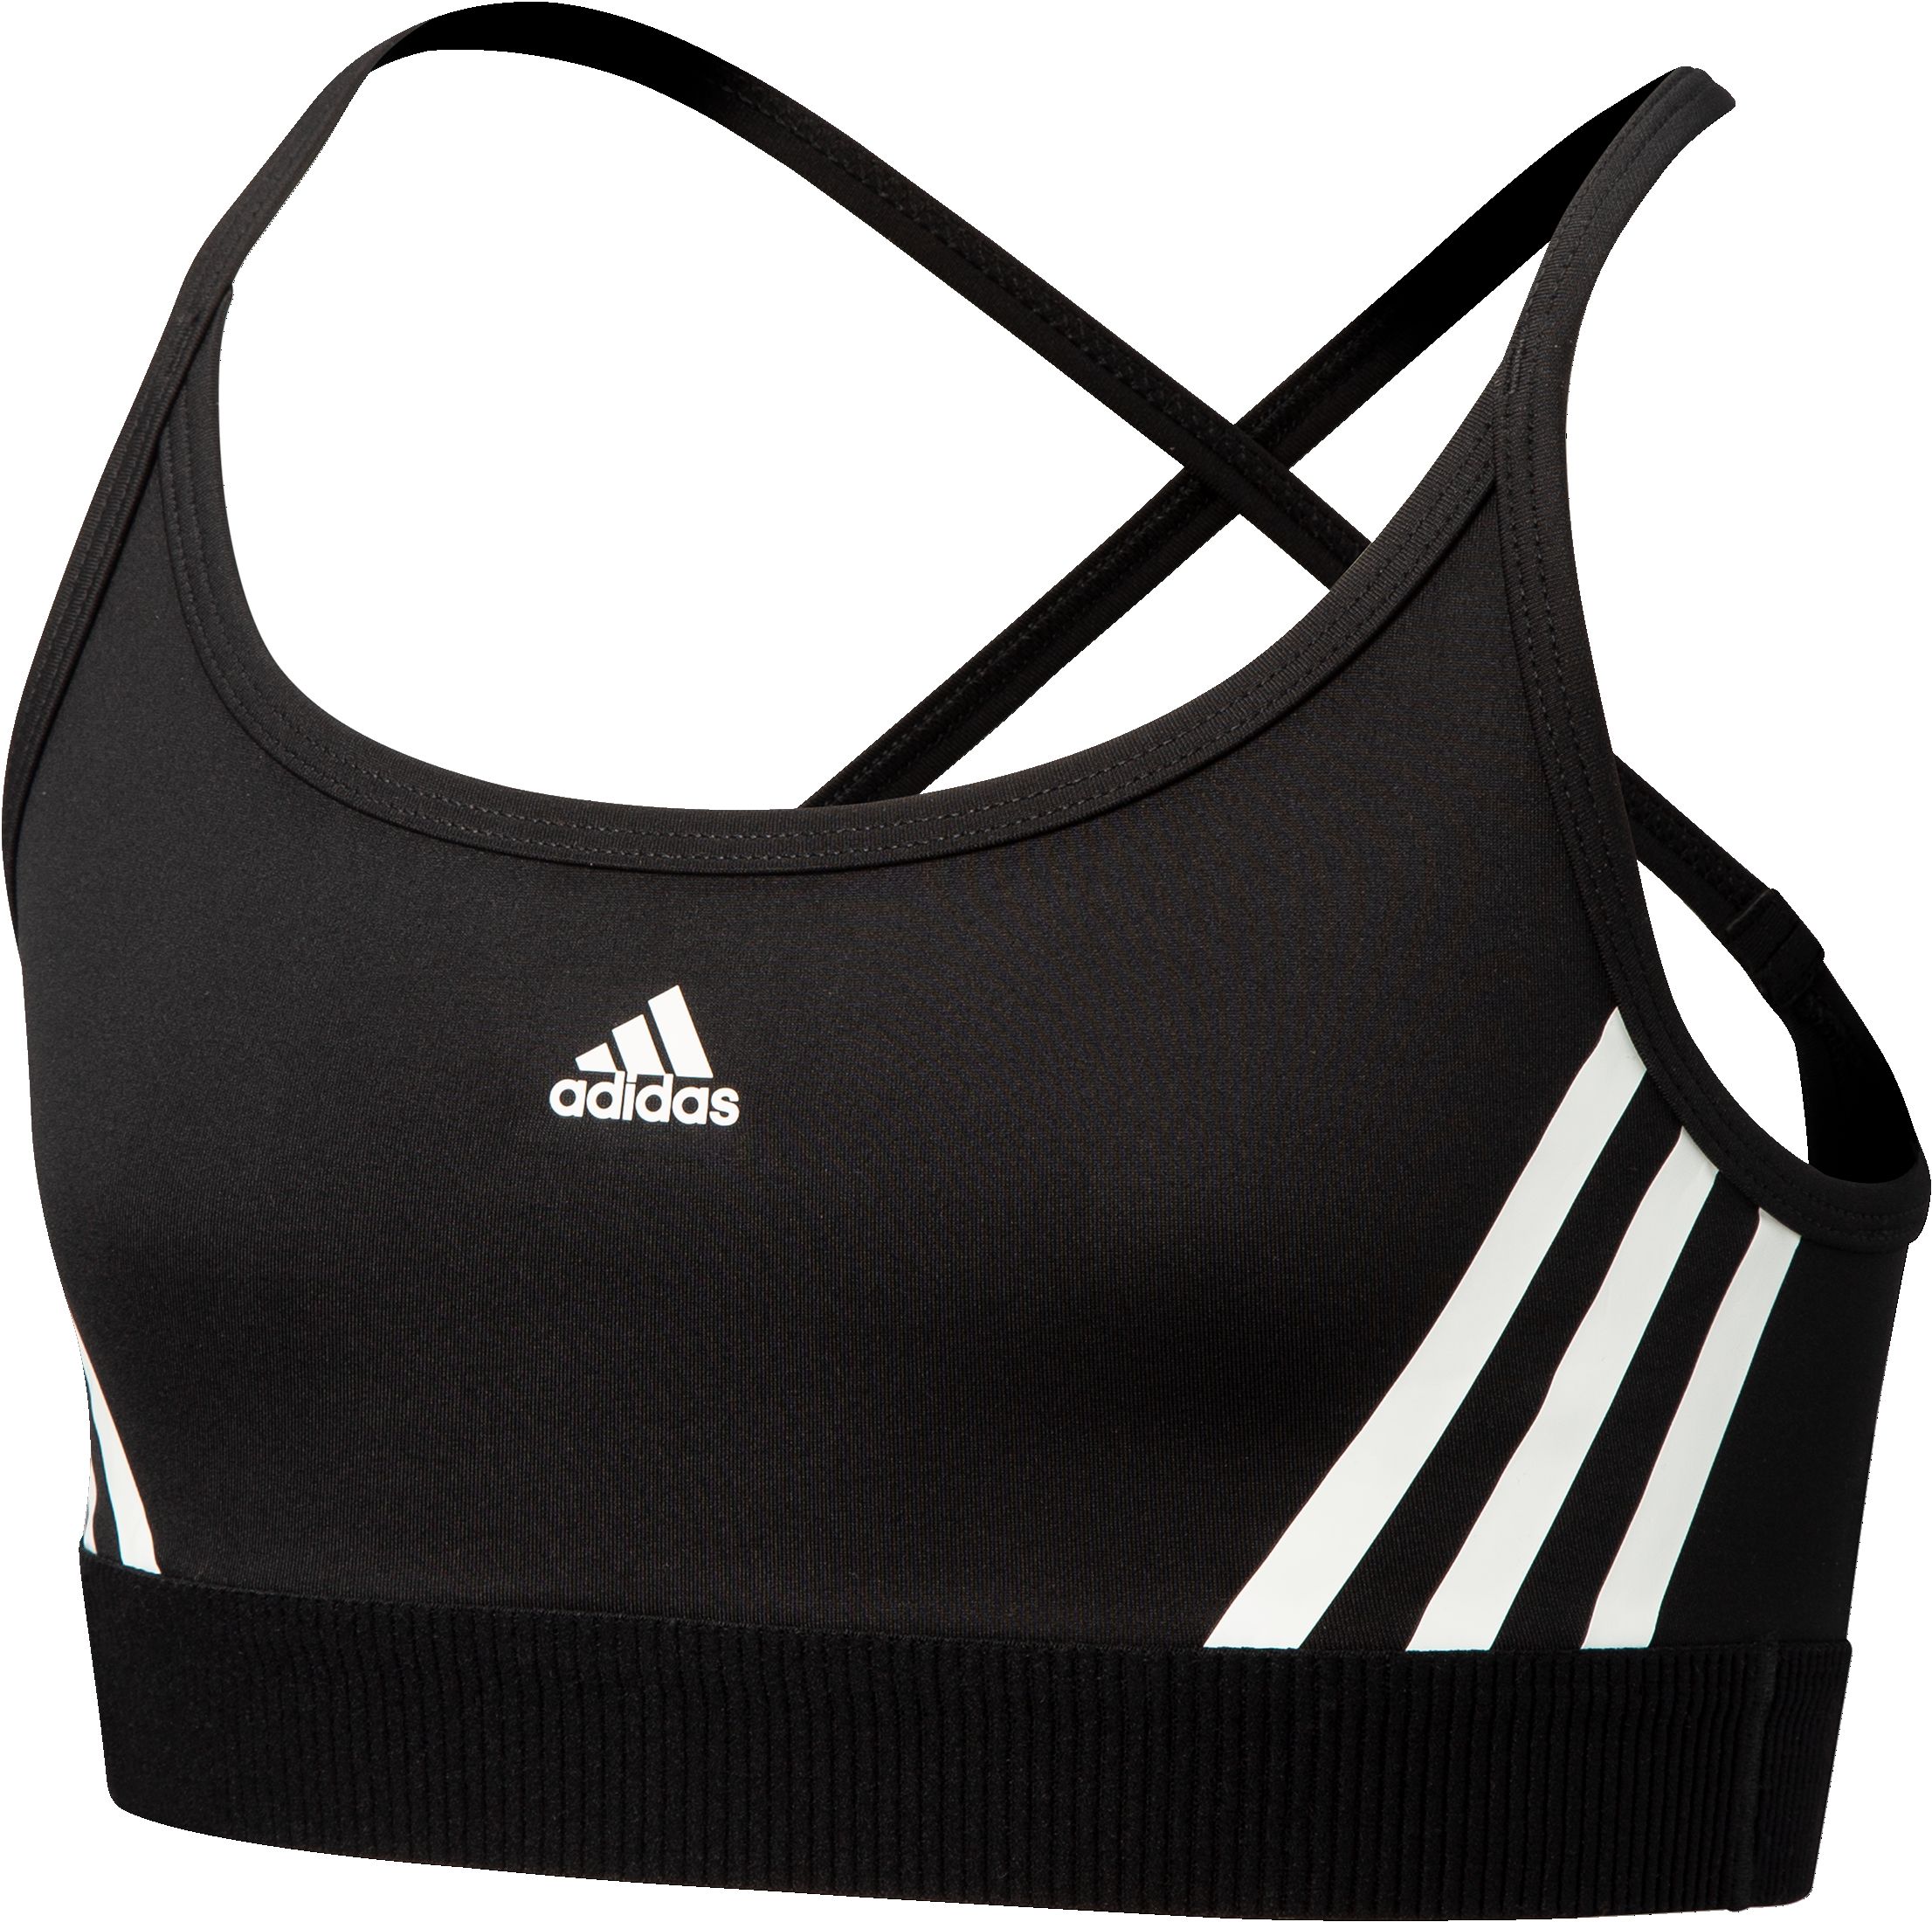 https://media-www.sportchek.ca/product/div-03-softgoods/dpt-72-casual-clothing/sdpt-04-girls/333623473/adidas-all-me-bra-blk-q122--aef17a57-bc3c-4503-a506-2c70cac72942-jpgrendition.jpg?imdensity=1&imwidth=1244&impolicy=mZoom